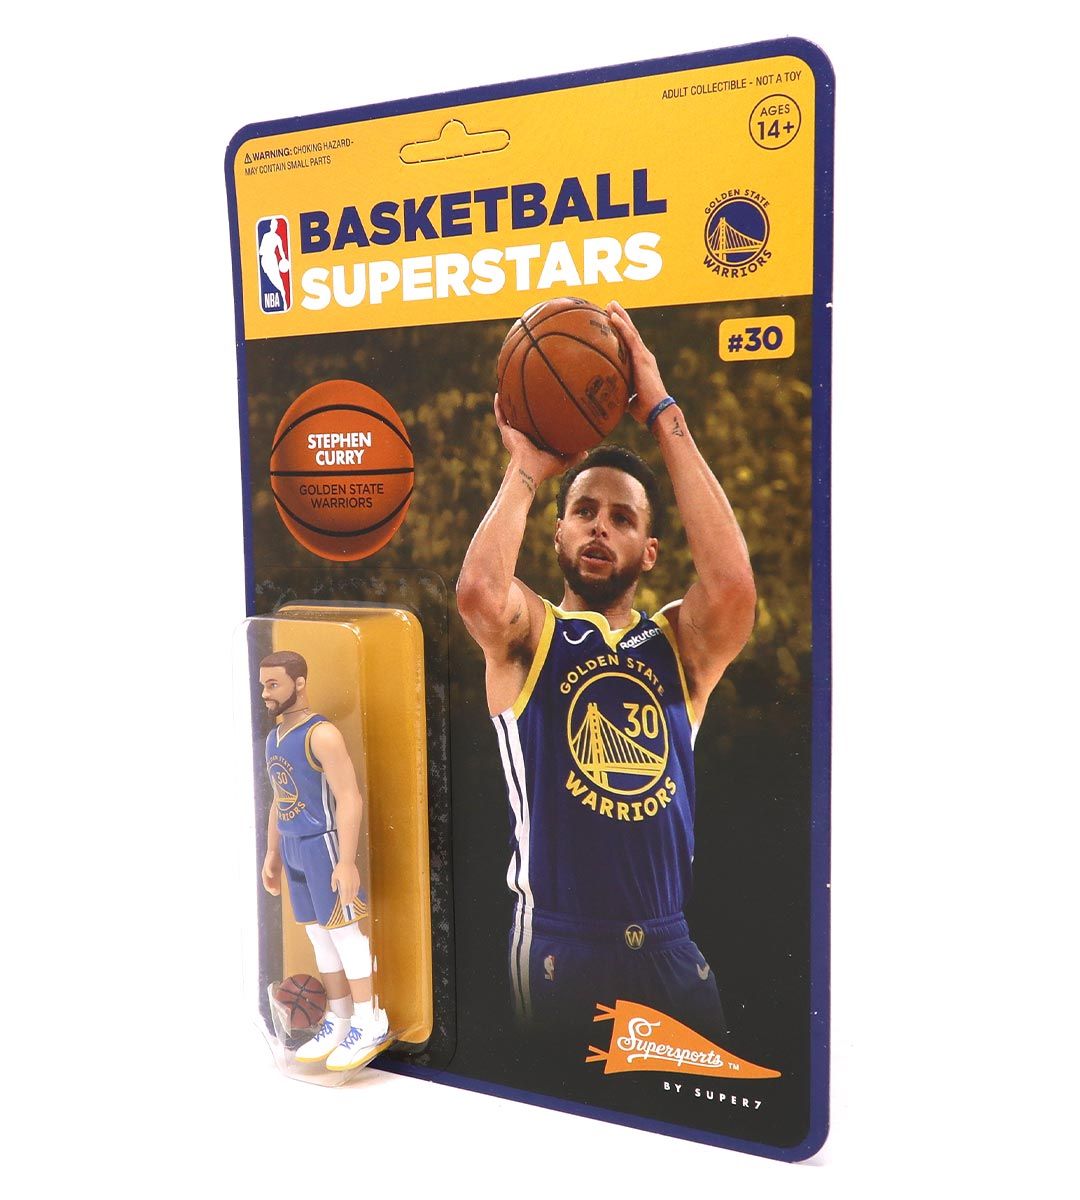 Stephen Curry - ReAction figure